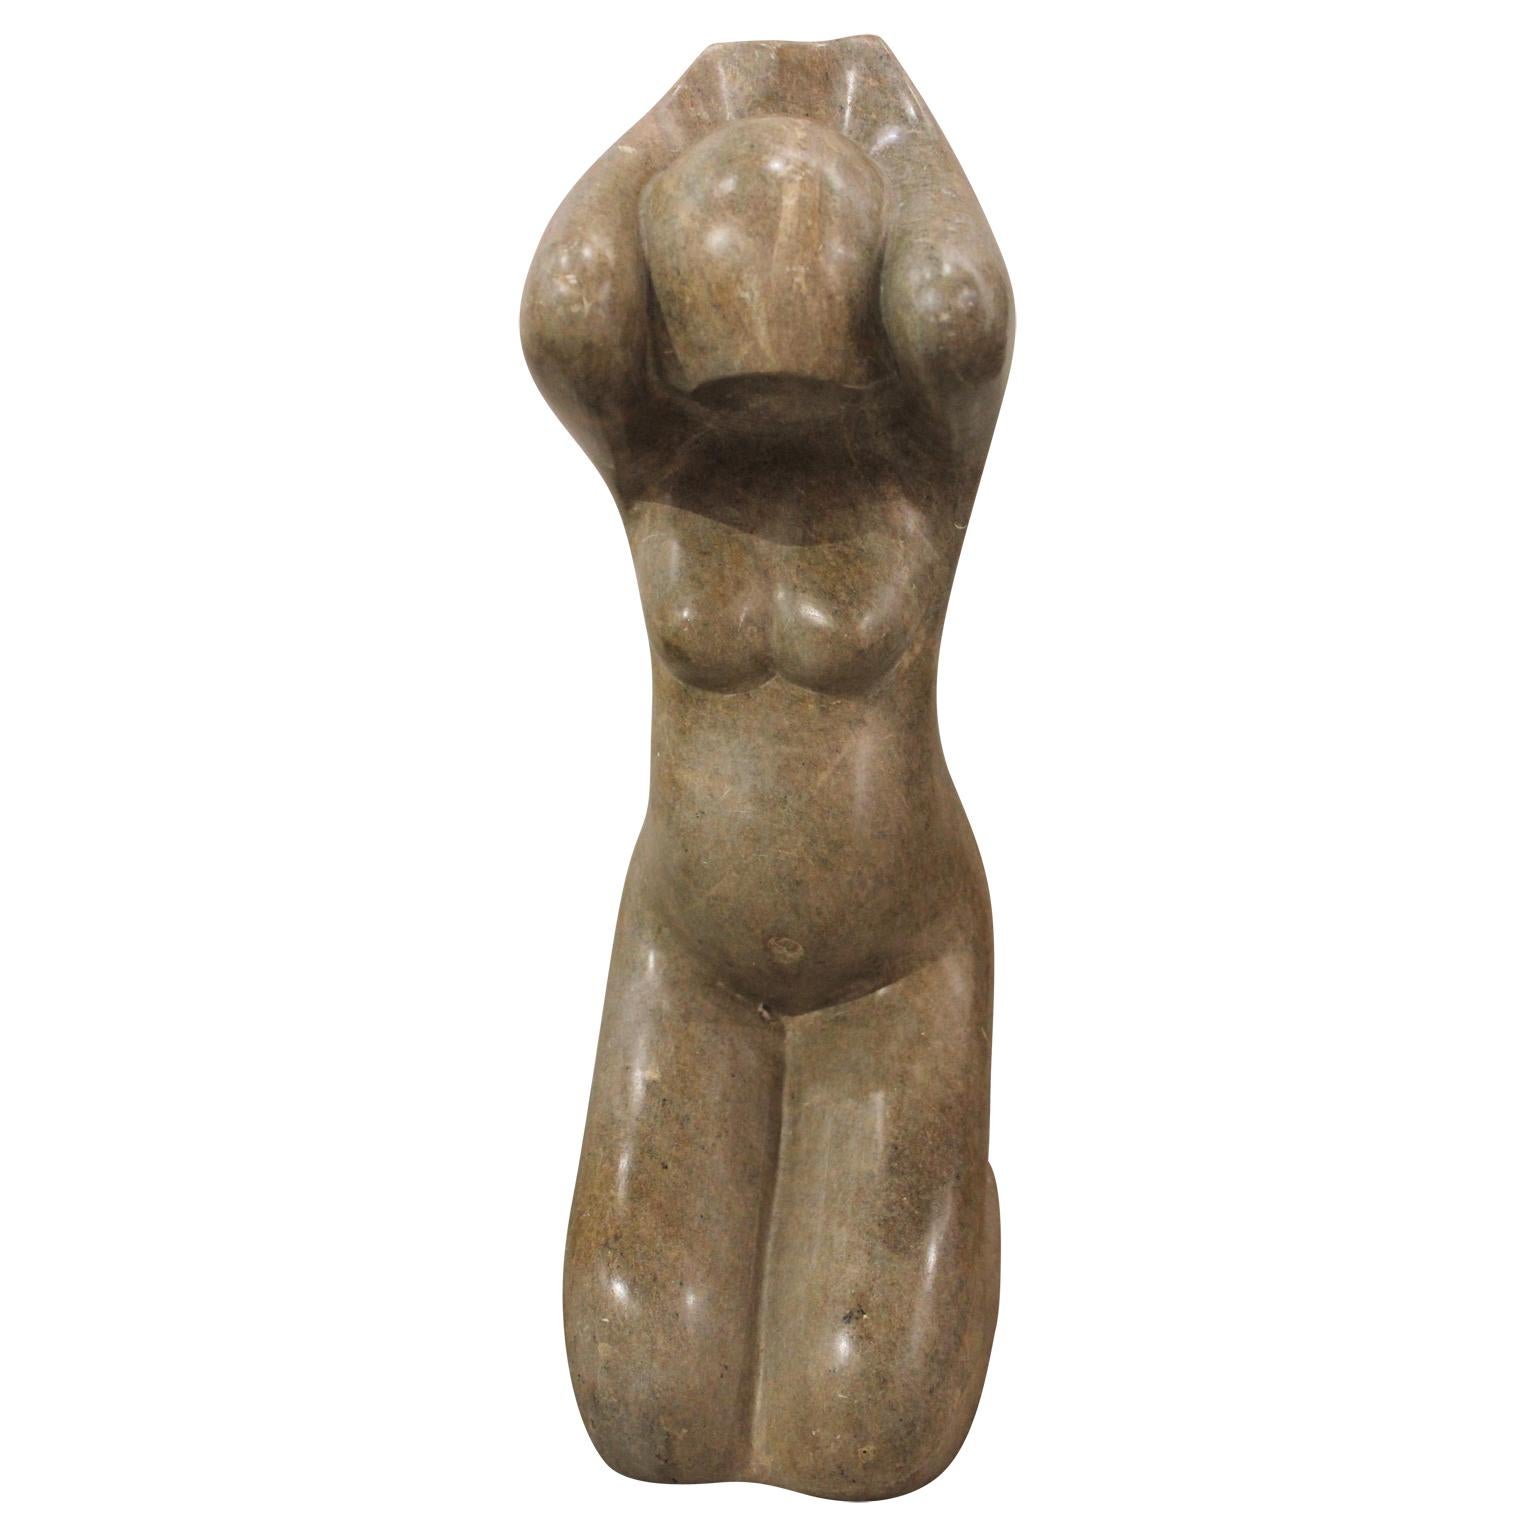 Tan colored stone sculpture of a female figure with hands covering the sides of her head. The sculpture is signed by the artist and dated. Milton Goldin is known for producing abstract figurative works of women in movement.